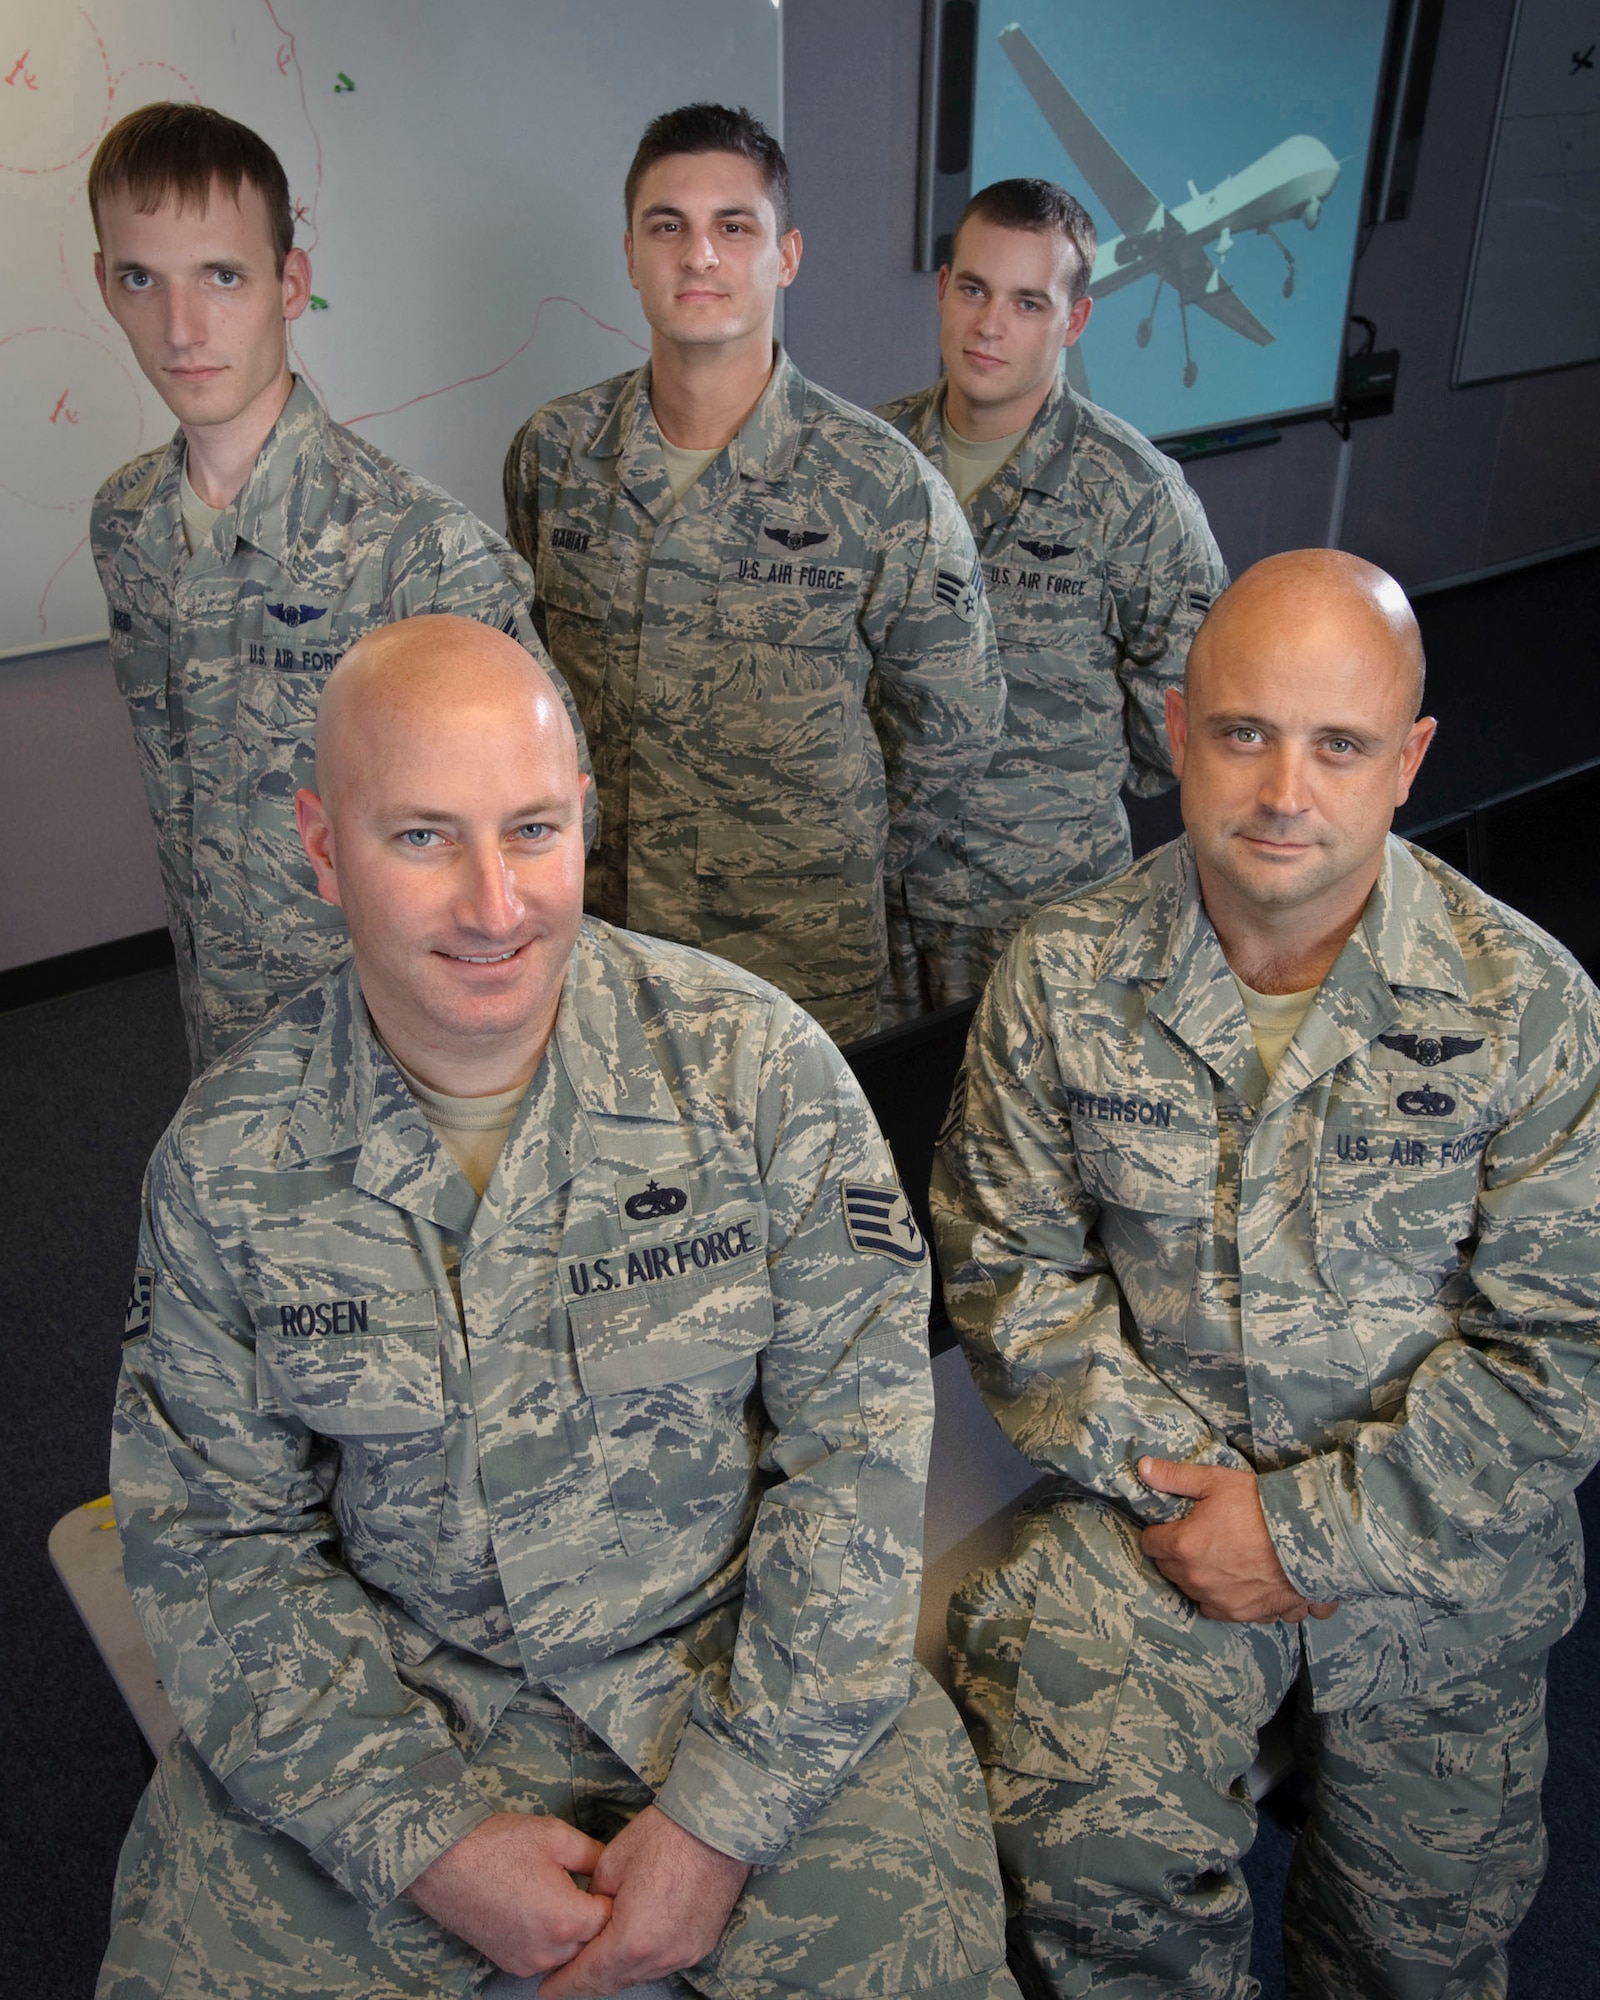 (Front row) Staff Sgt. Adam Rosen, Staff Sgt. Jason Peterson, (back row) Staff Sgt. Jeremy Reid, Senior Airman Robert Babian, and Airman 1st Class Ronald Shortledge are the graduates of the inaugural Basic Sensor Operator Course taught at Randolph Air Force Base, Texas, to prepare enlisted members for careers as Unmanned Aerial Systems Sensor Operators. (U.S. Air Force photo/Steve Thurow)